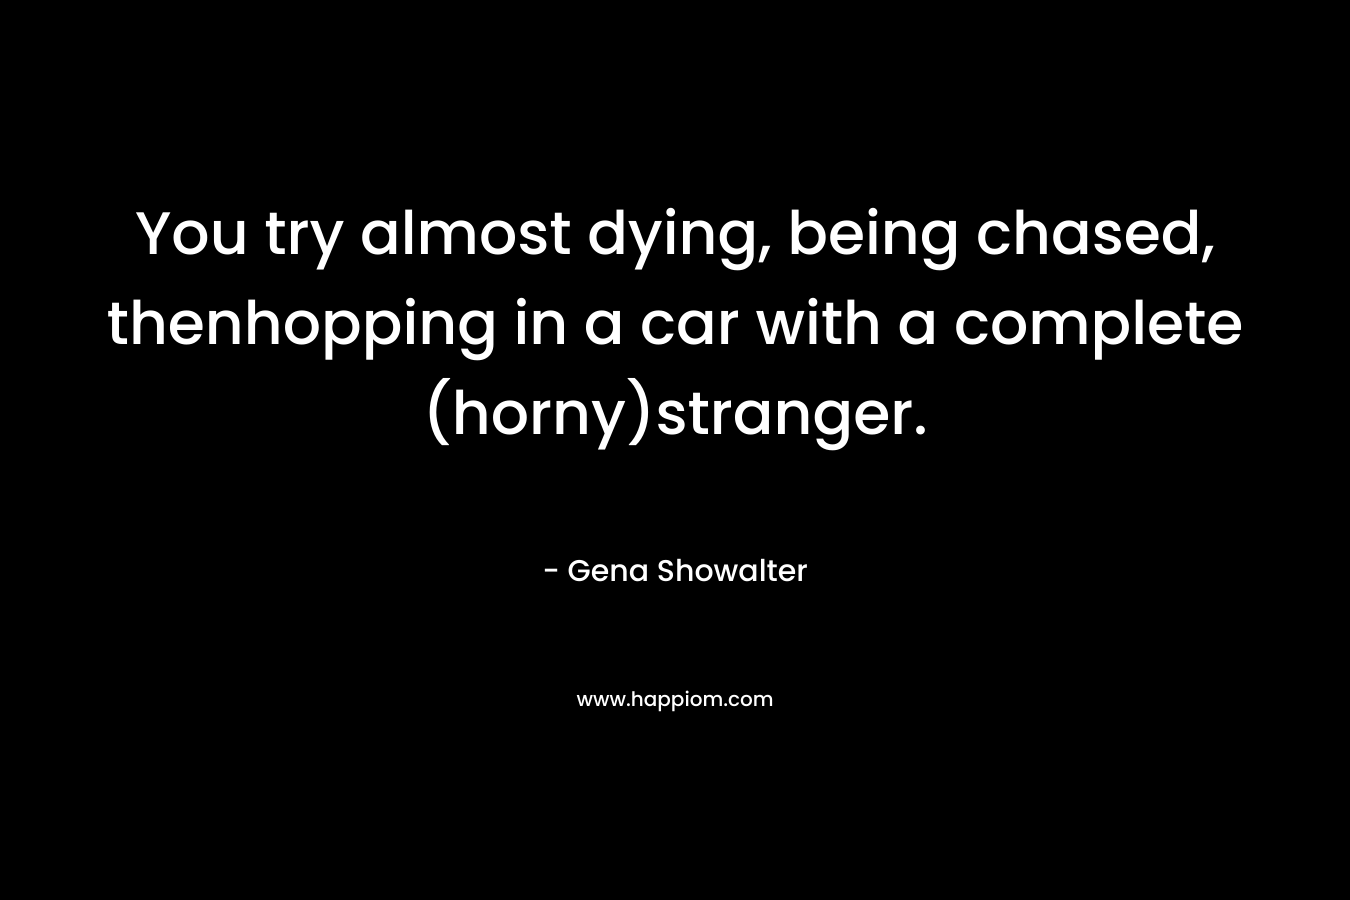 You try almost dying, being chased, thenhopping in a car with a complete (horny)stranger.